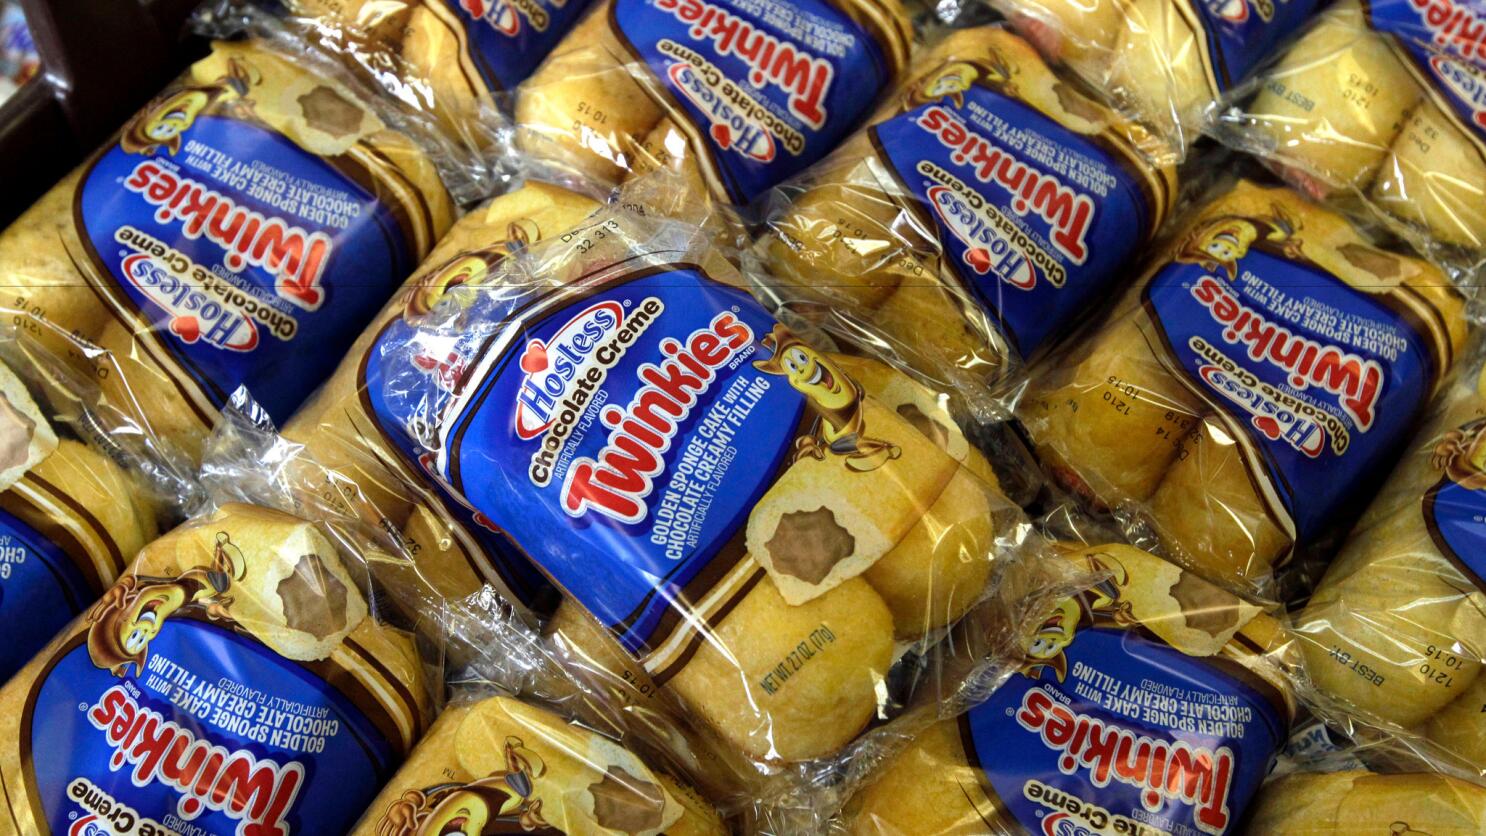 Twinkies Do Not Last Forever, According to a New Scientific Analysis